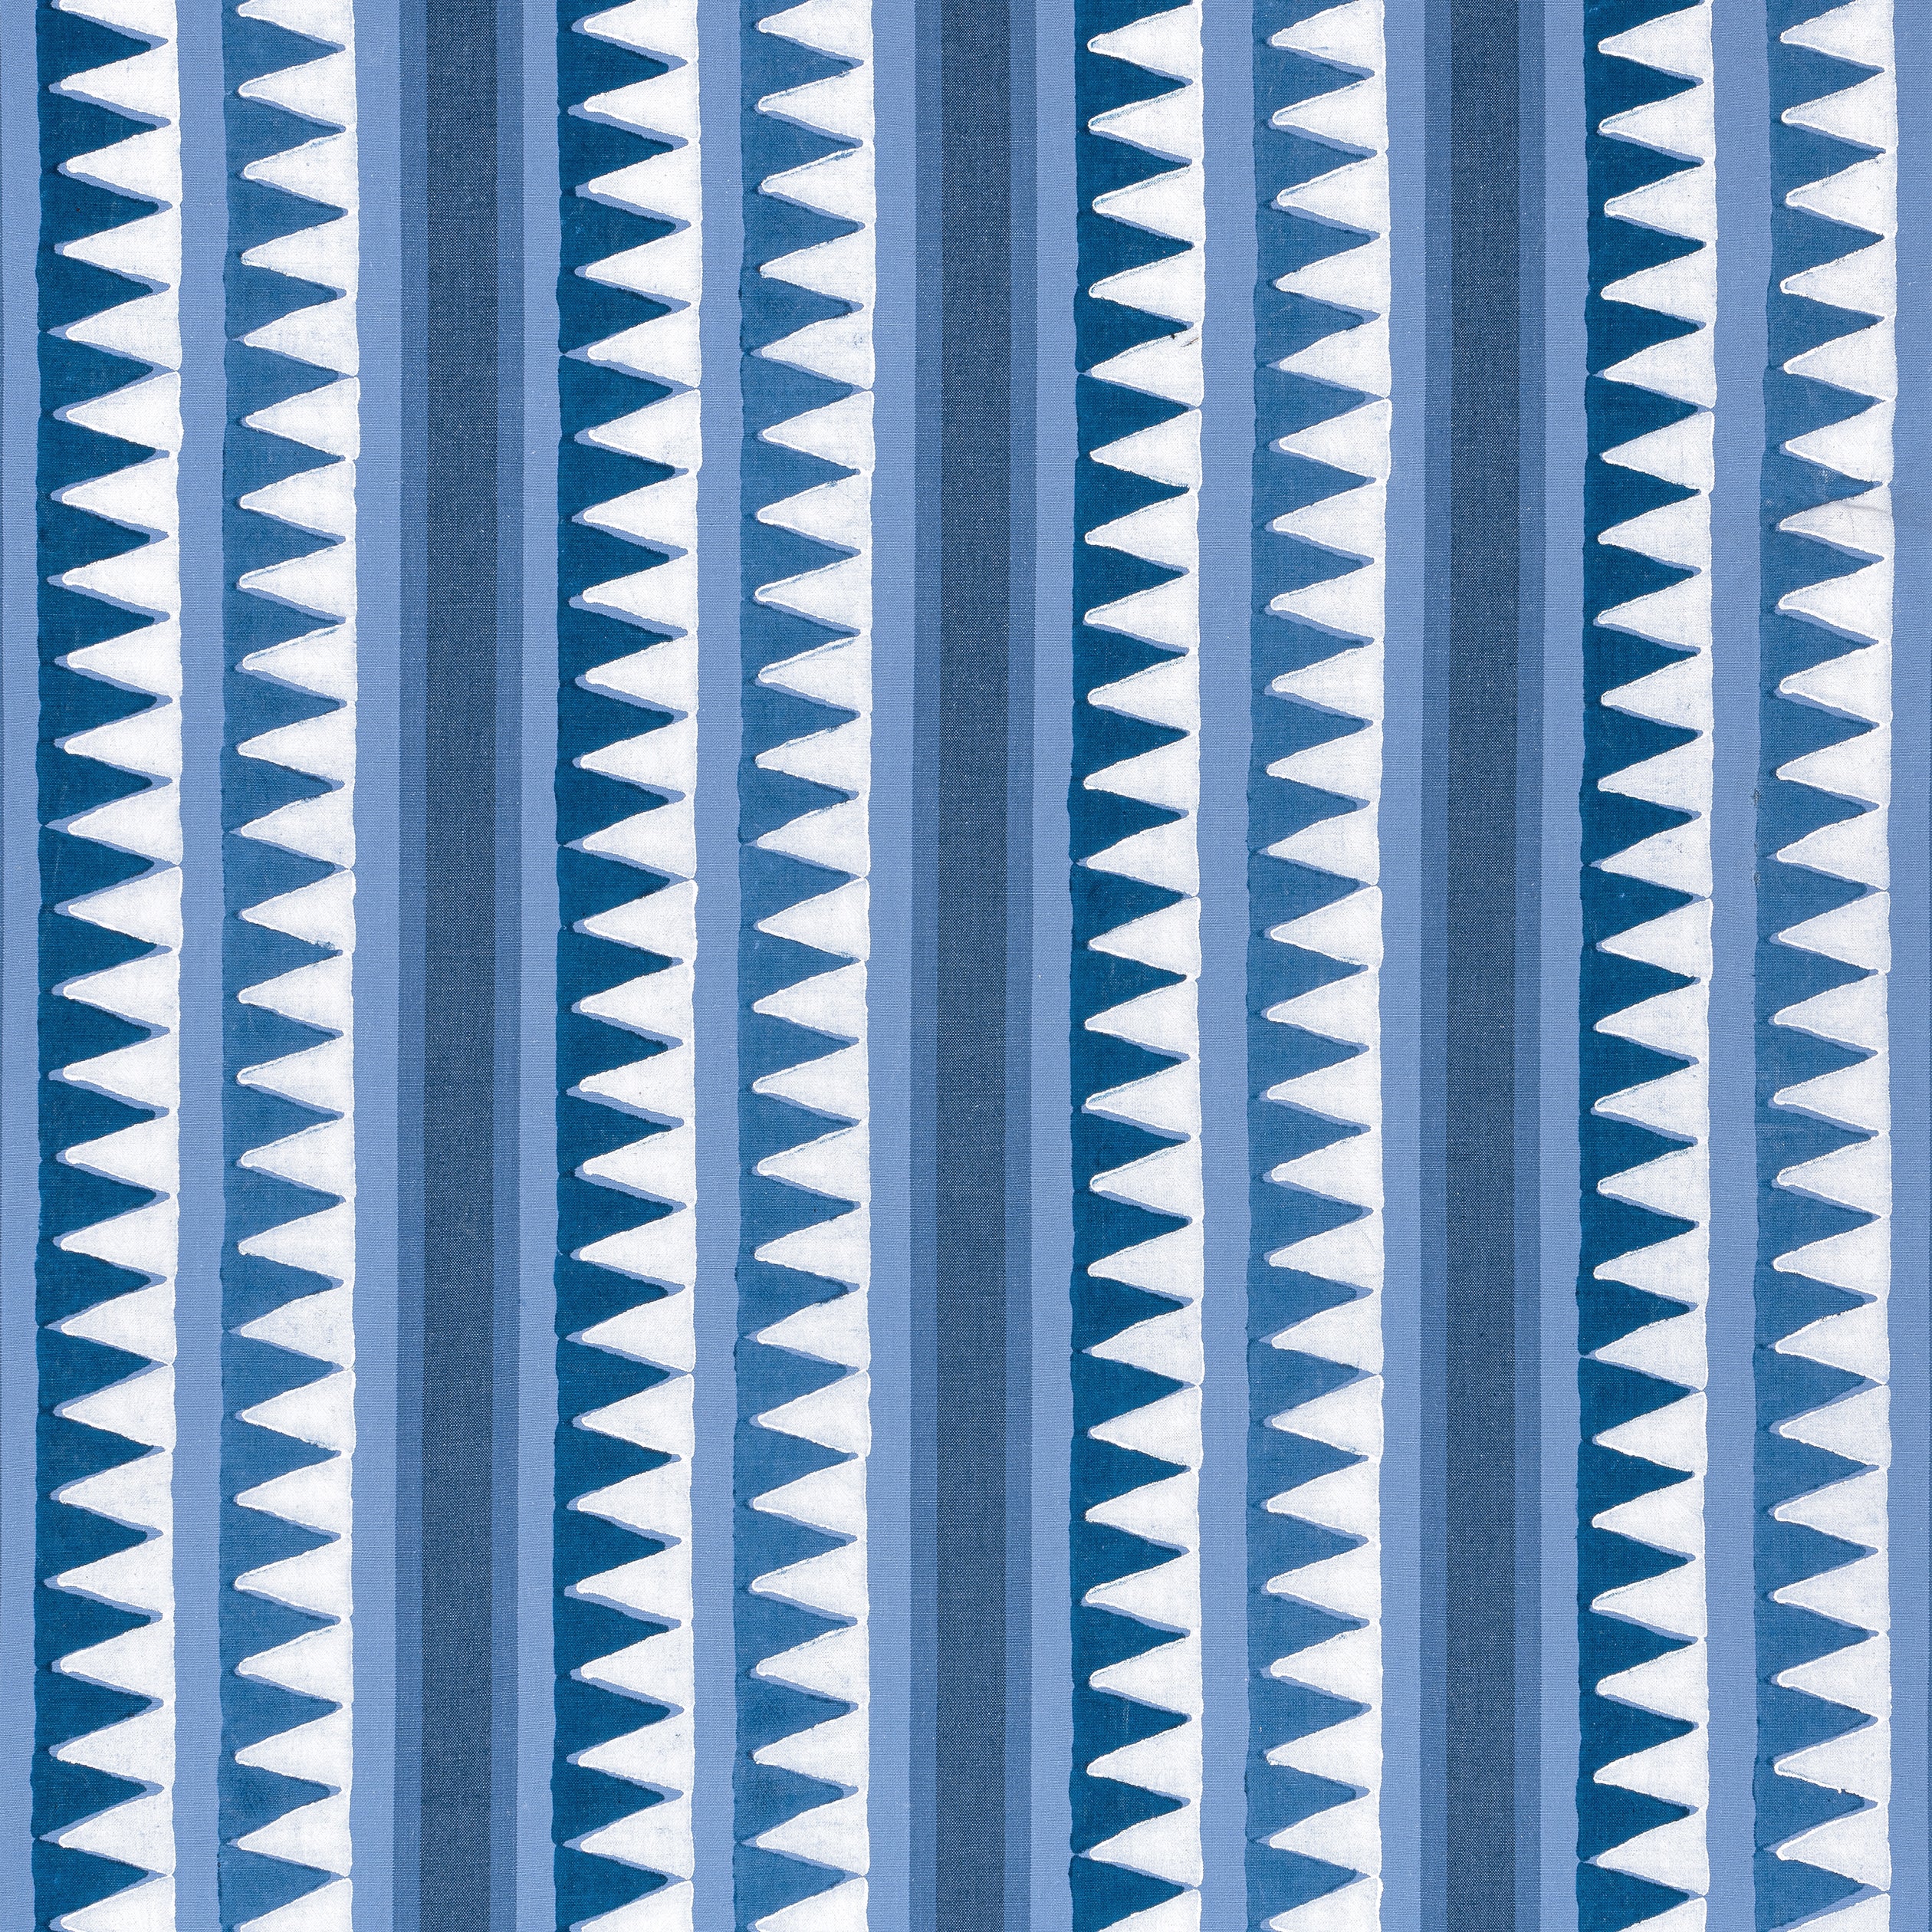 Lomita Stripe fabric in blue color - pattern number F916233 - by Thibaut in the Kismet collection